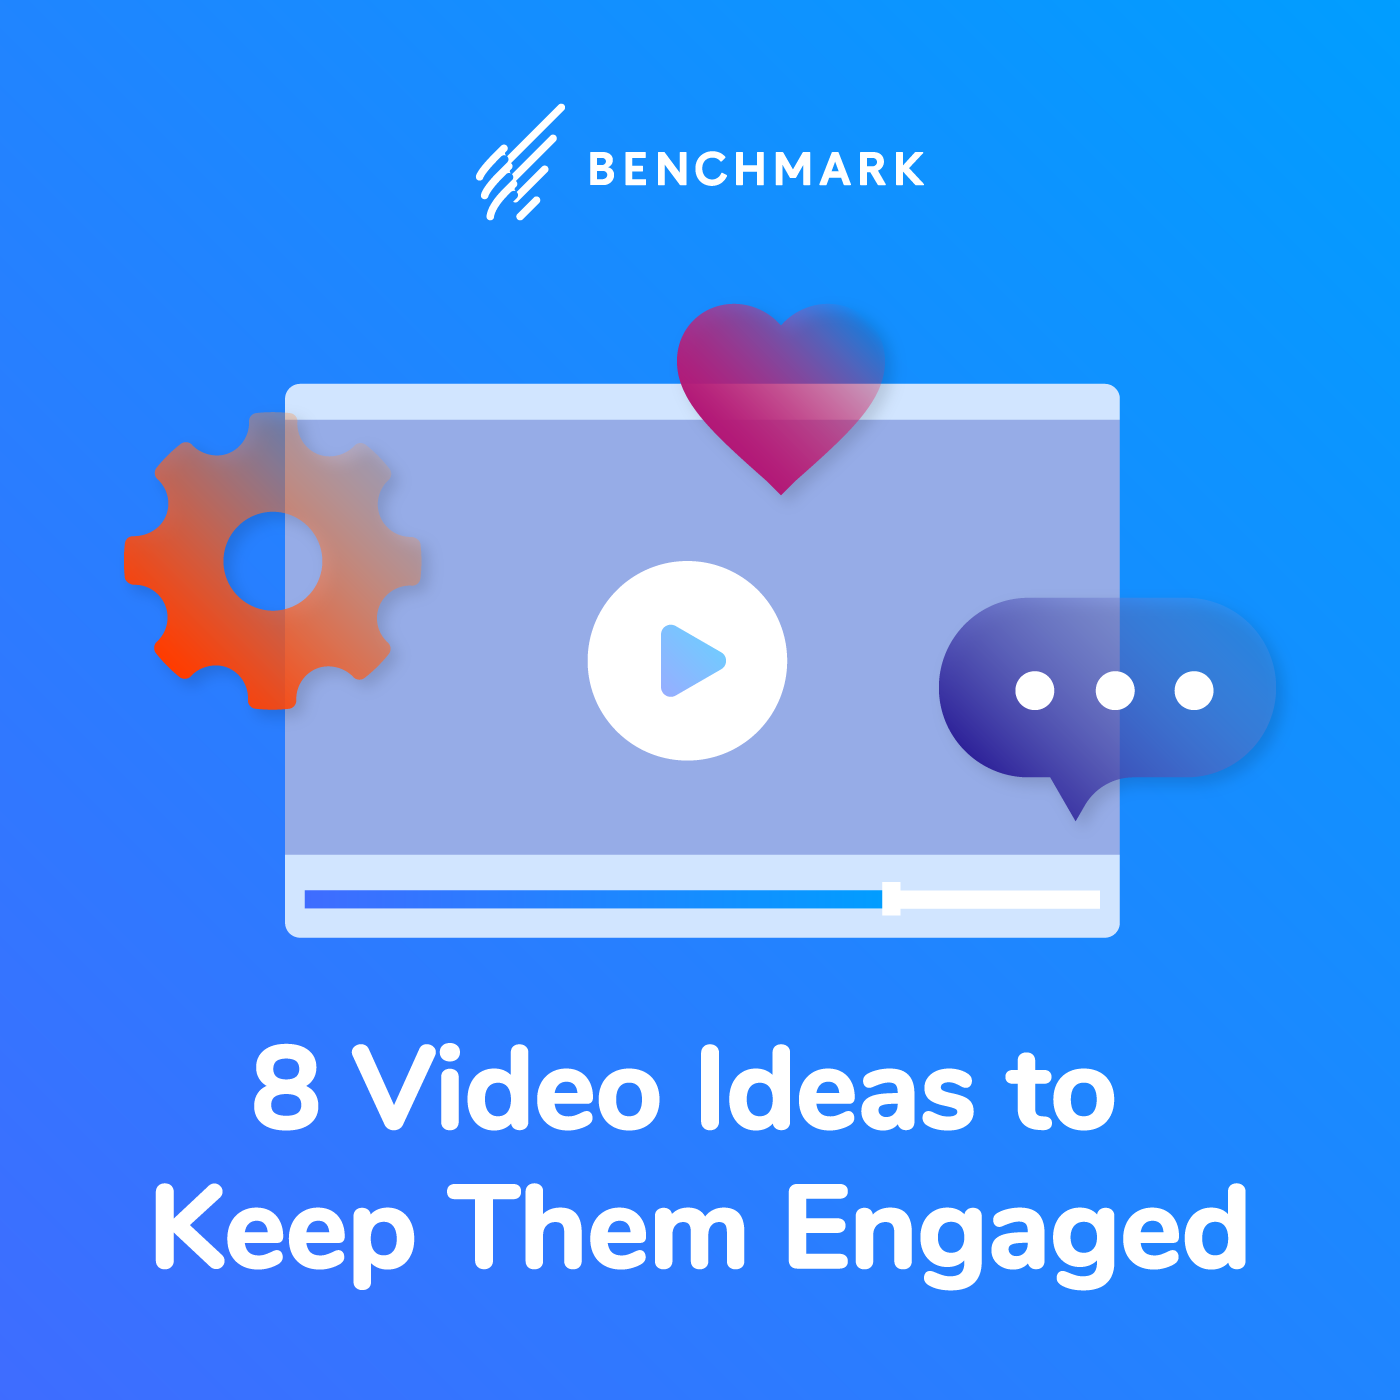 Email Subscriber Loyalty: 8 Video Ideas to Keep Them Engaged